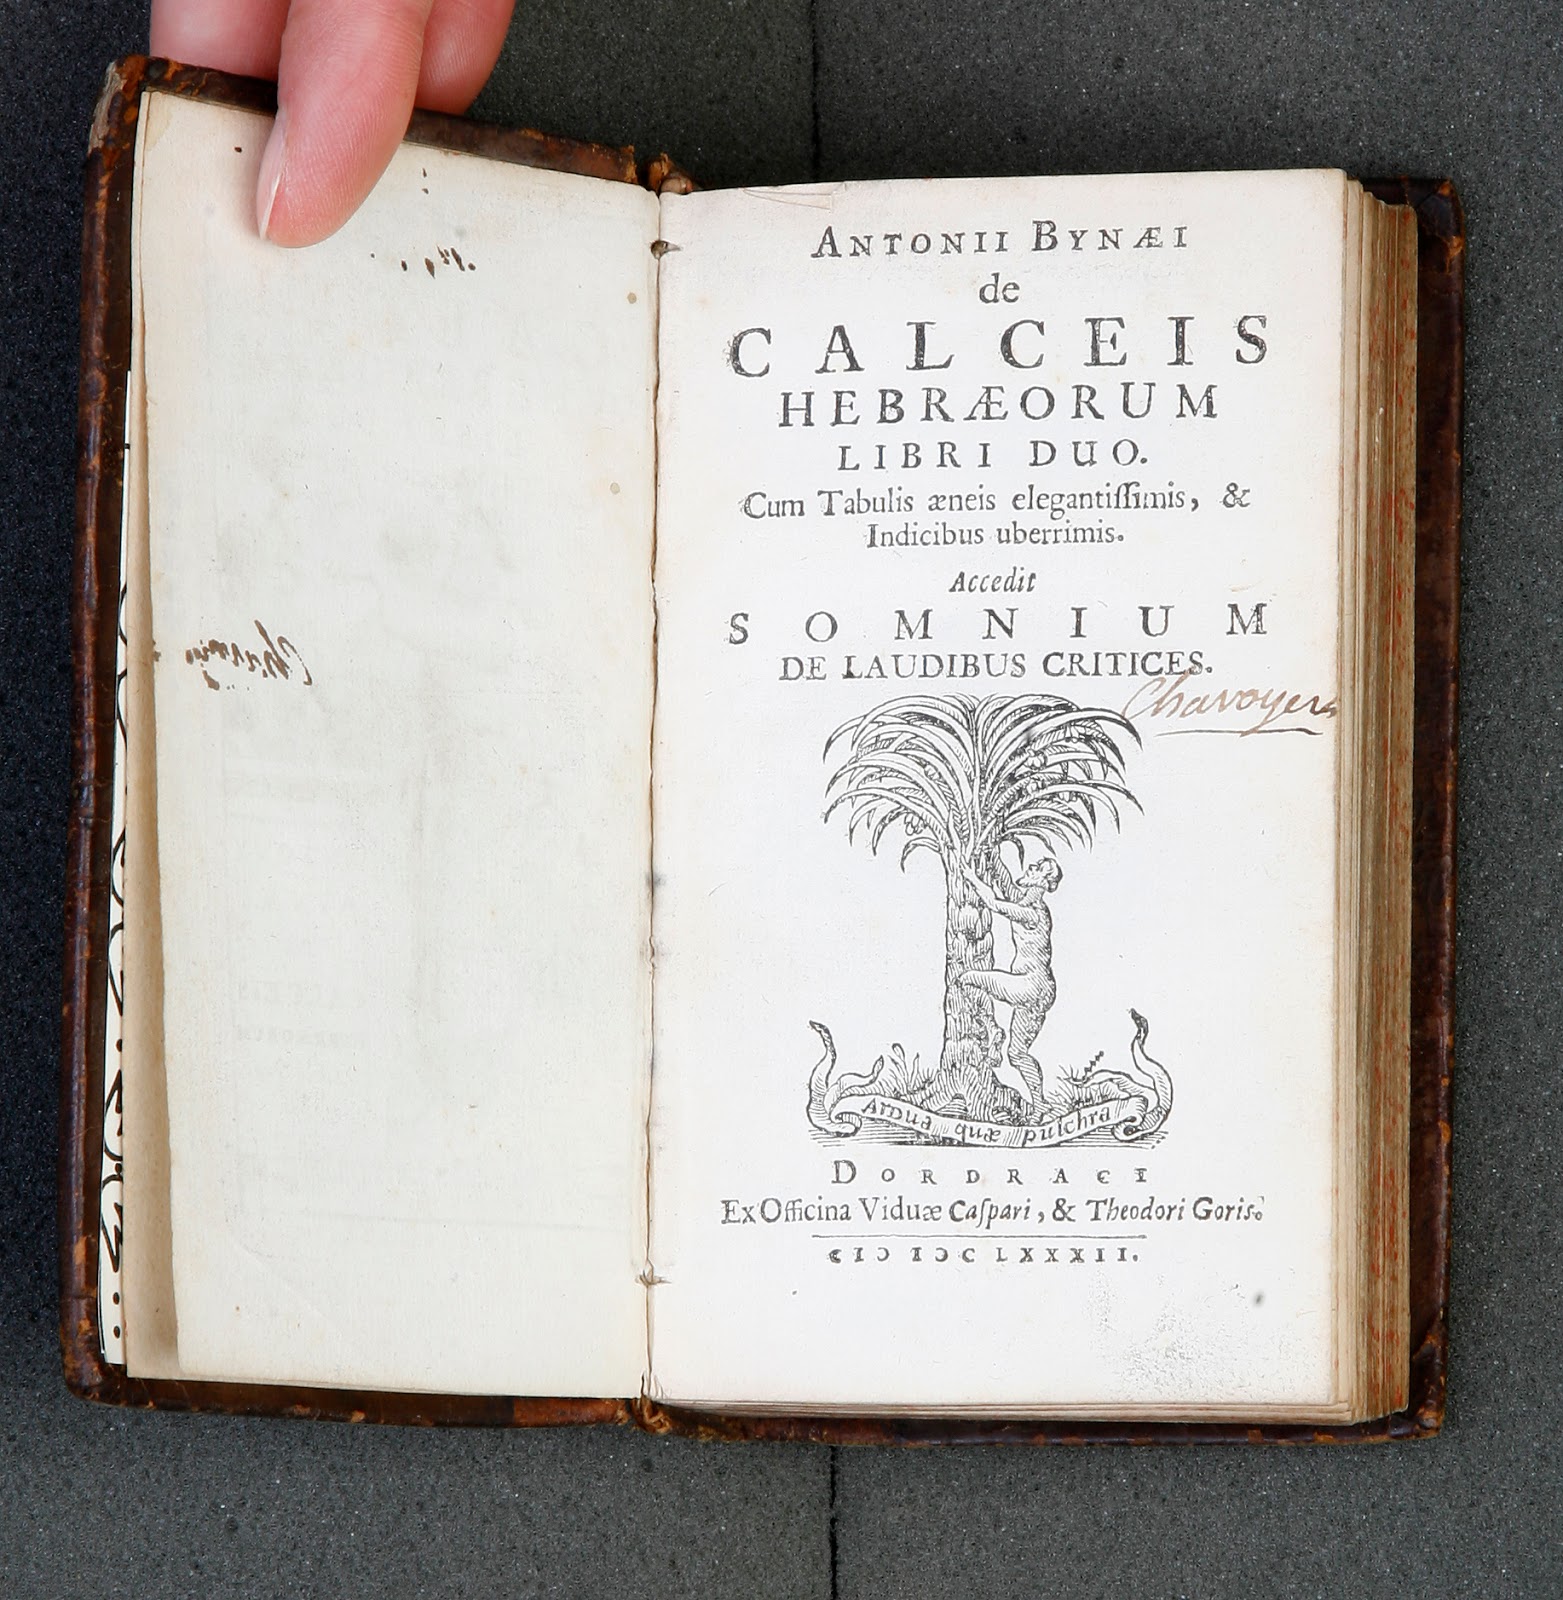 Cover page of Antonii Bynæi de Calceis Hebræorum with illustration of person climbing palm tree